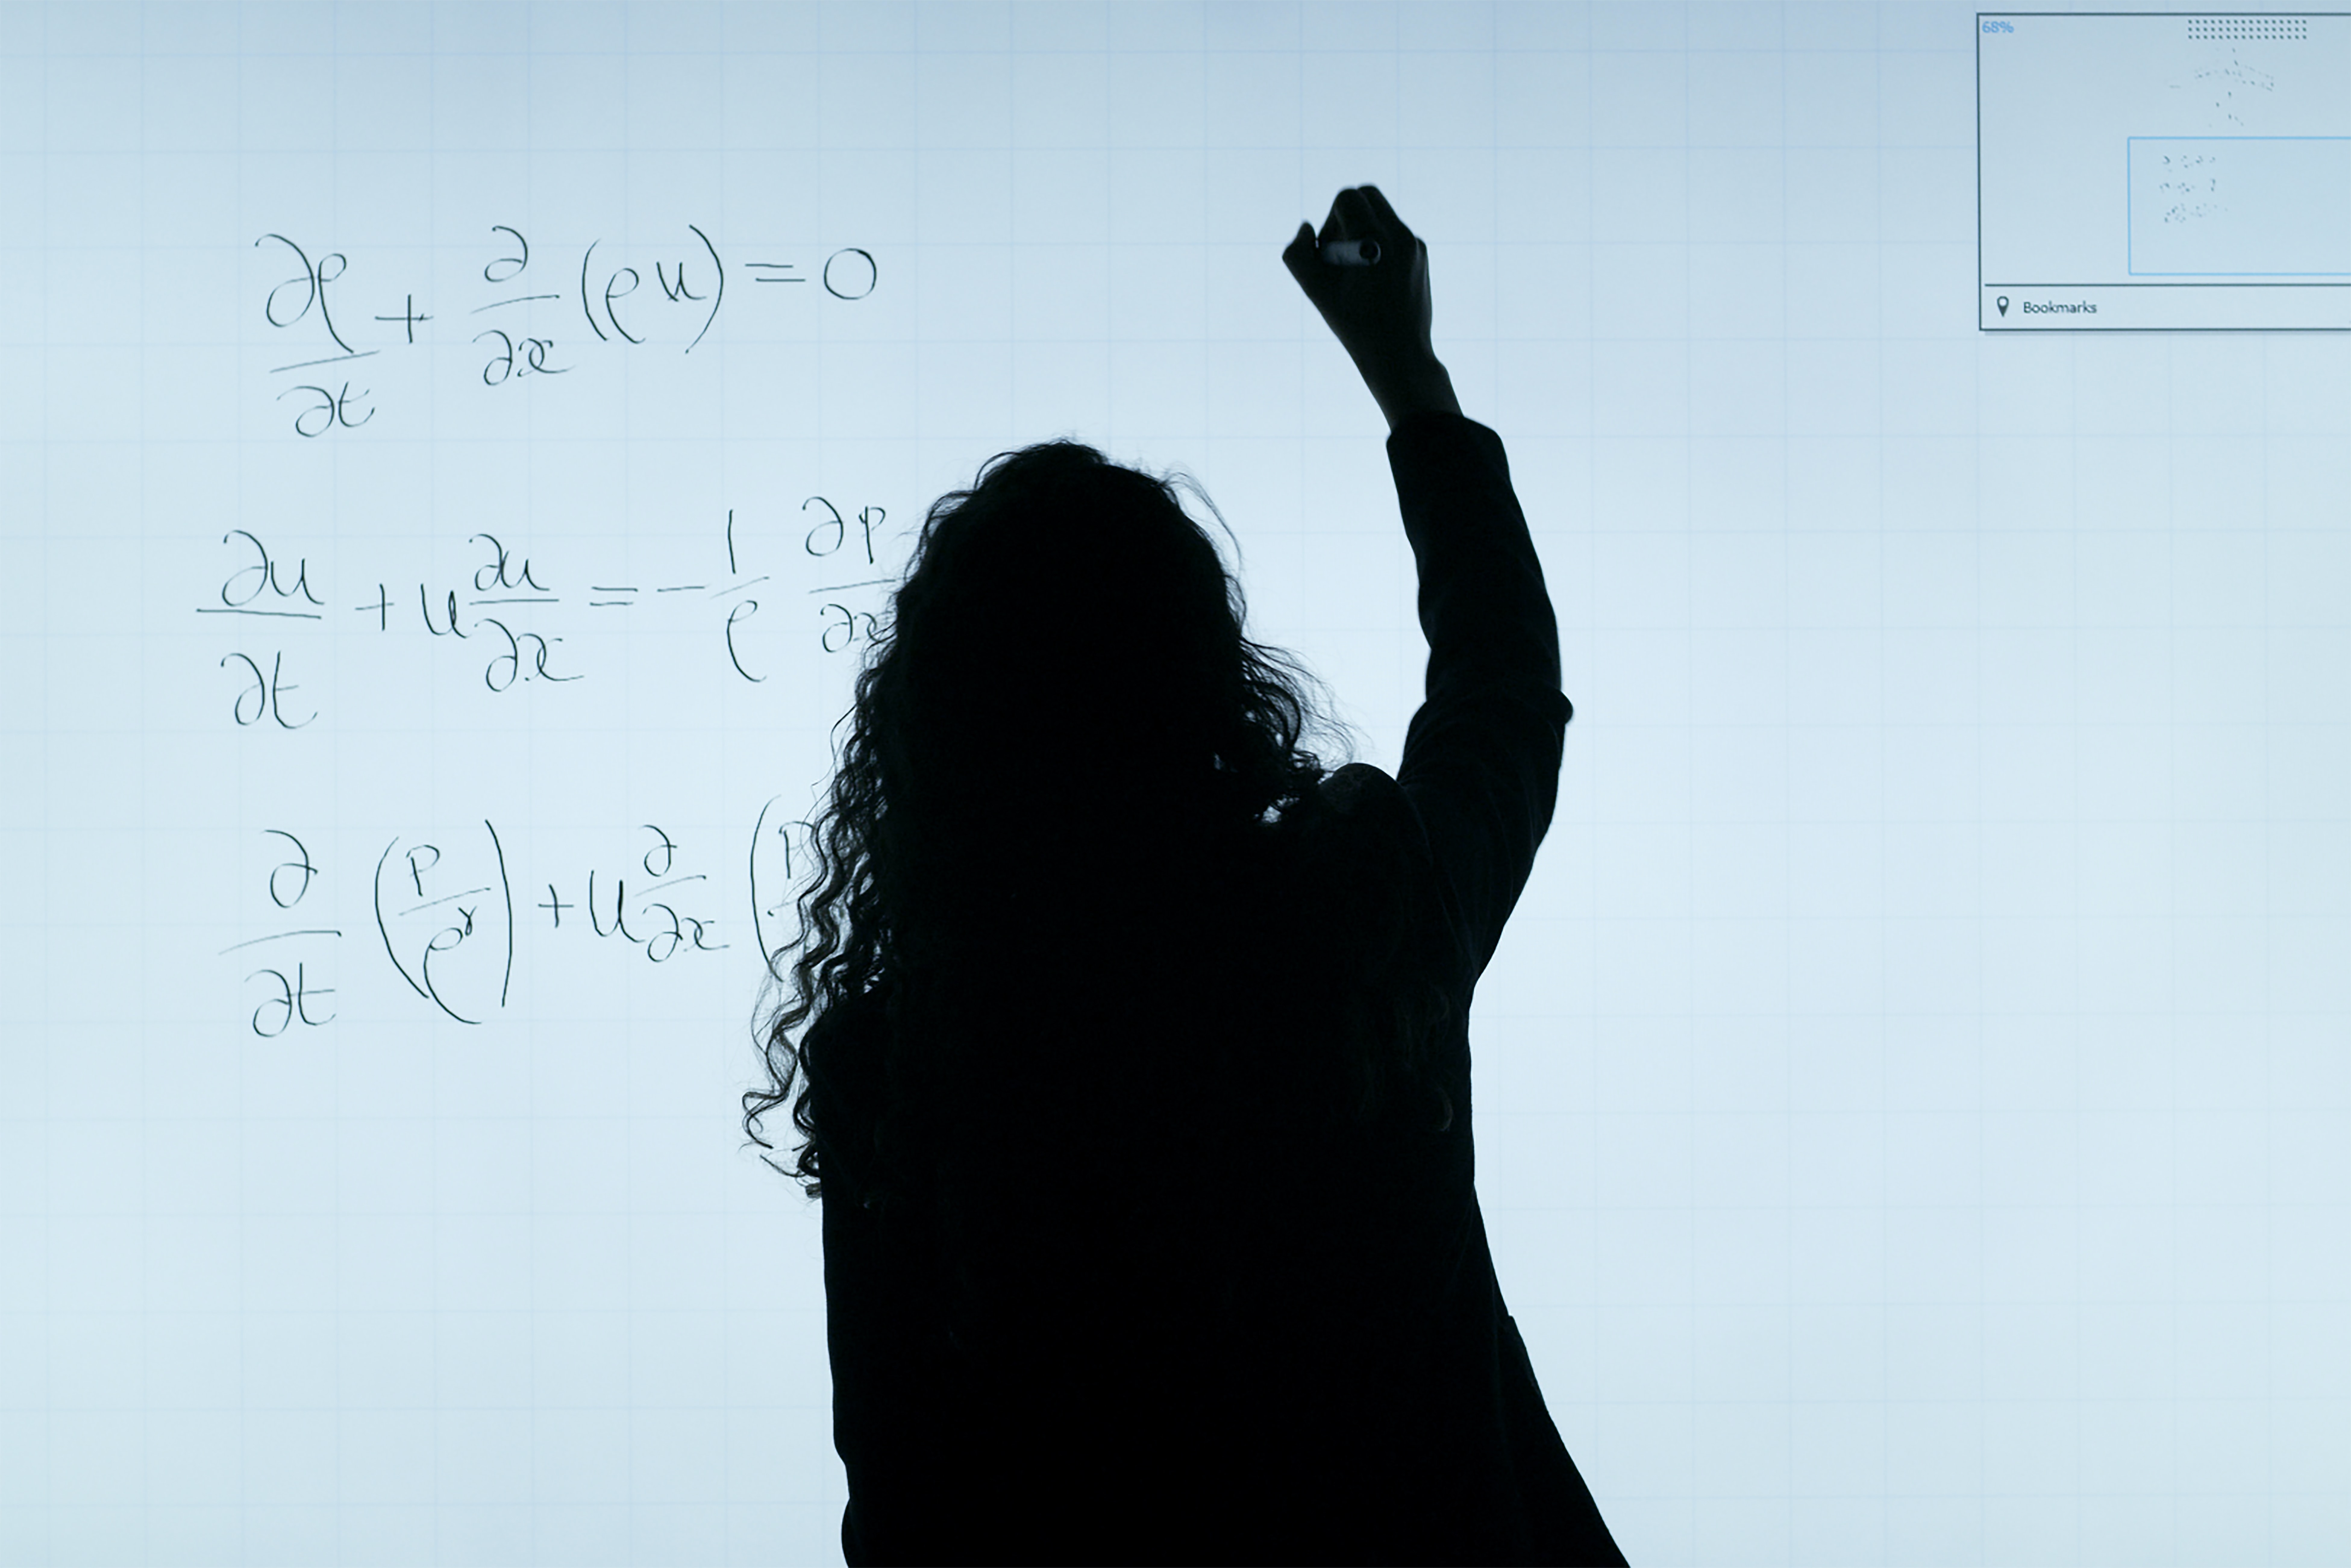 A silhouette of a person writing equations on a whiteboard